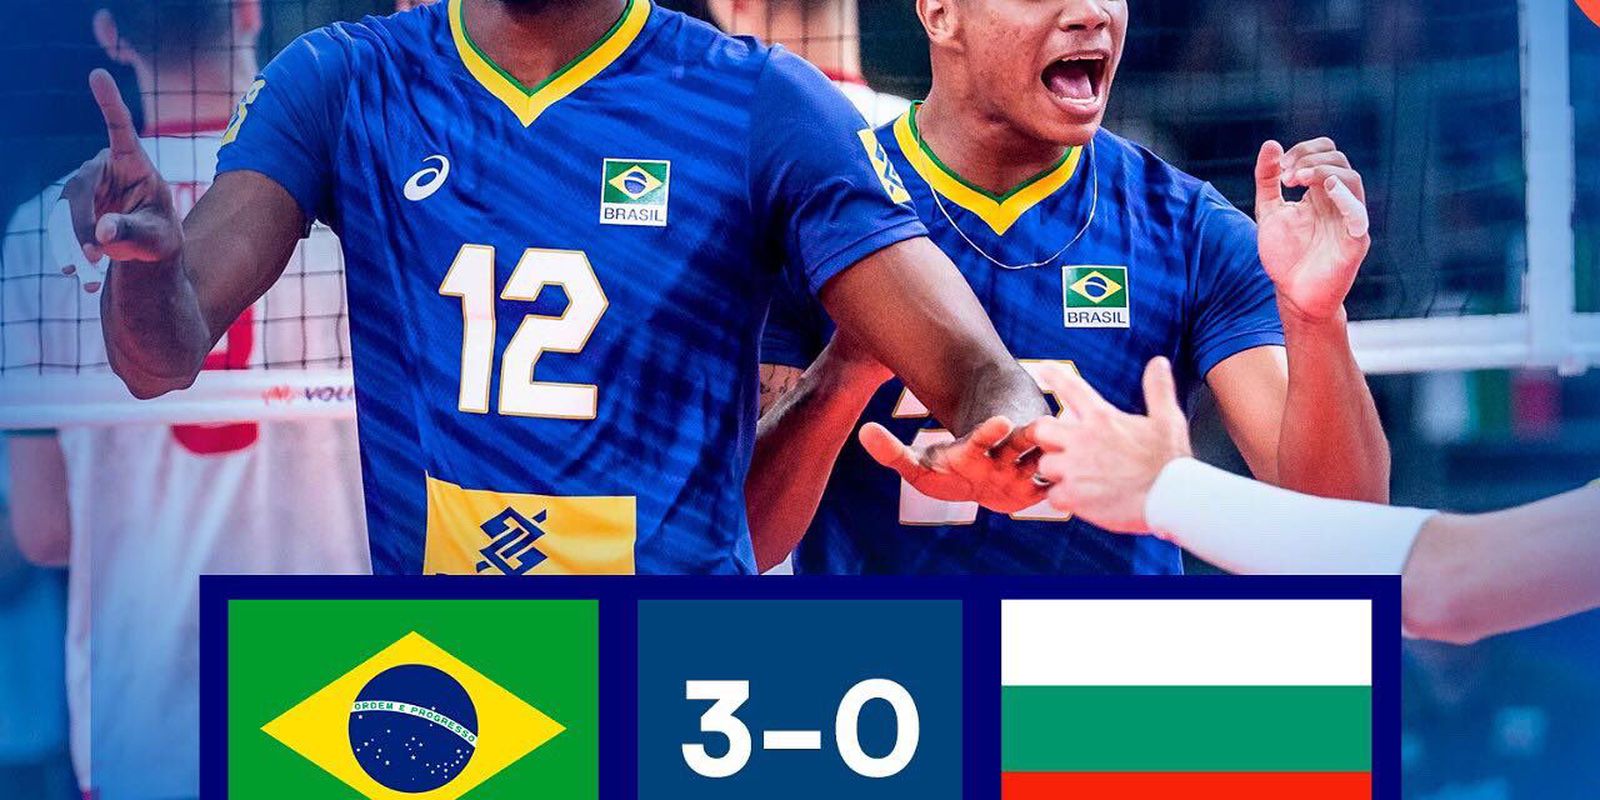 Brazil beats Bulgaria and ends the League of Nations stage in 6th place